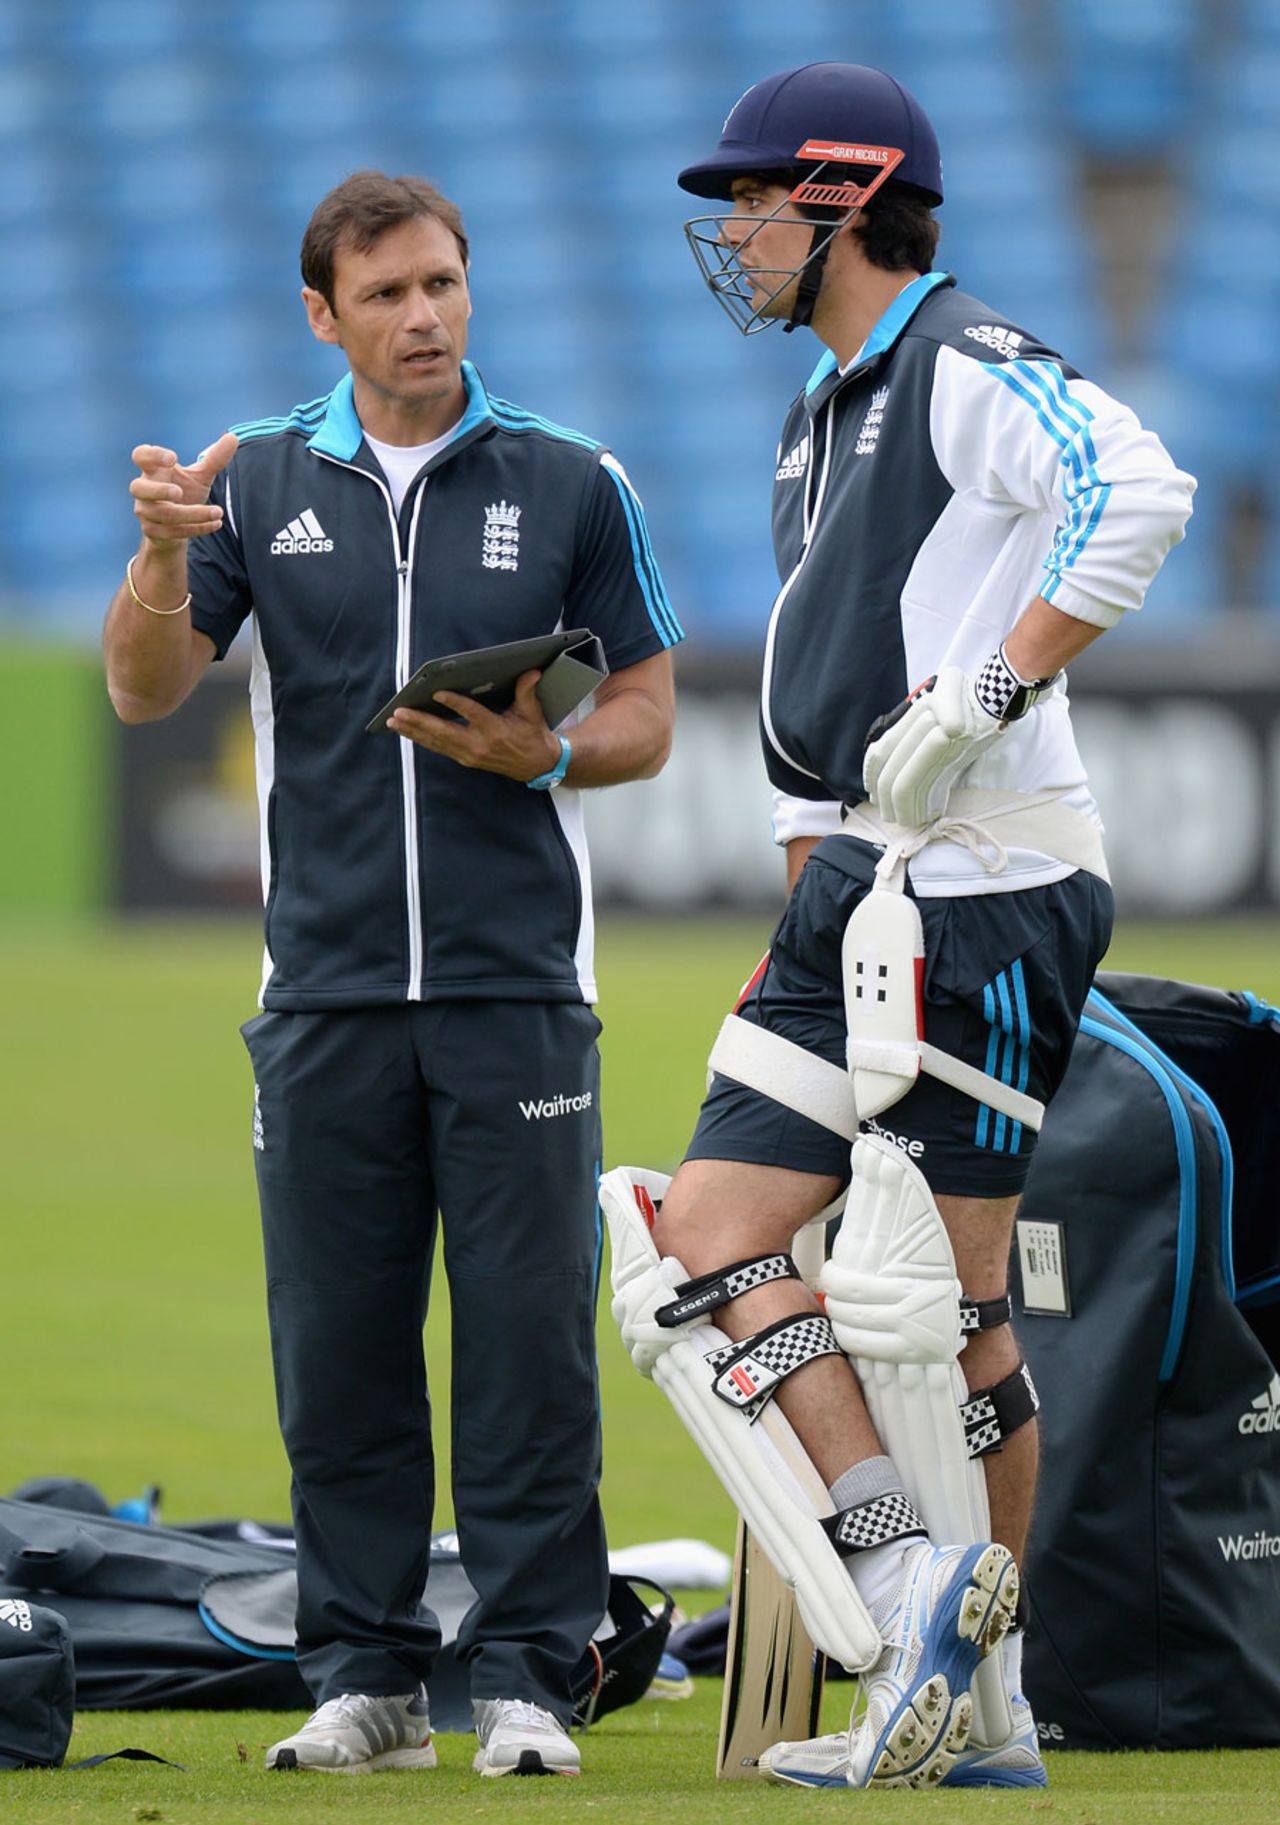 Alastair Cook discusses his game with batting coach Mark Ramprakash, Headingley, June 19, 2014